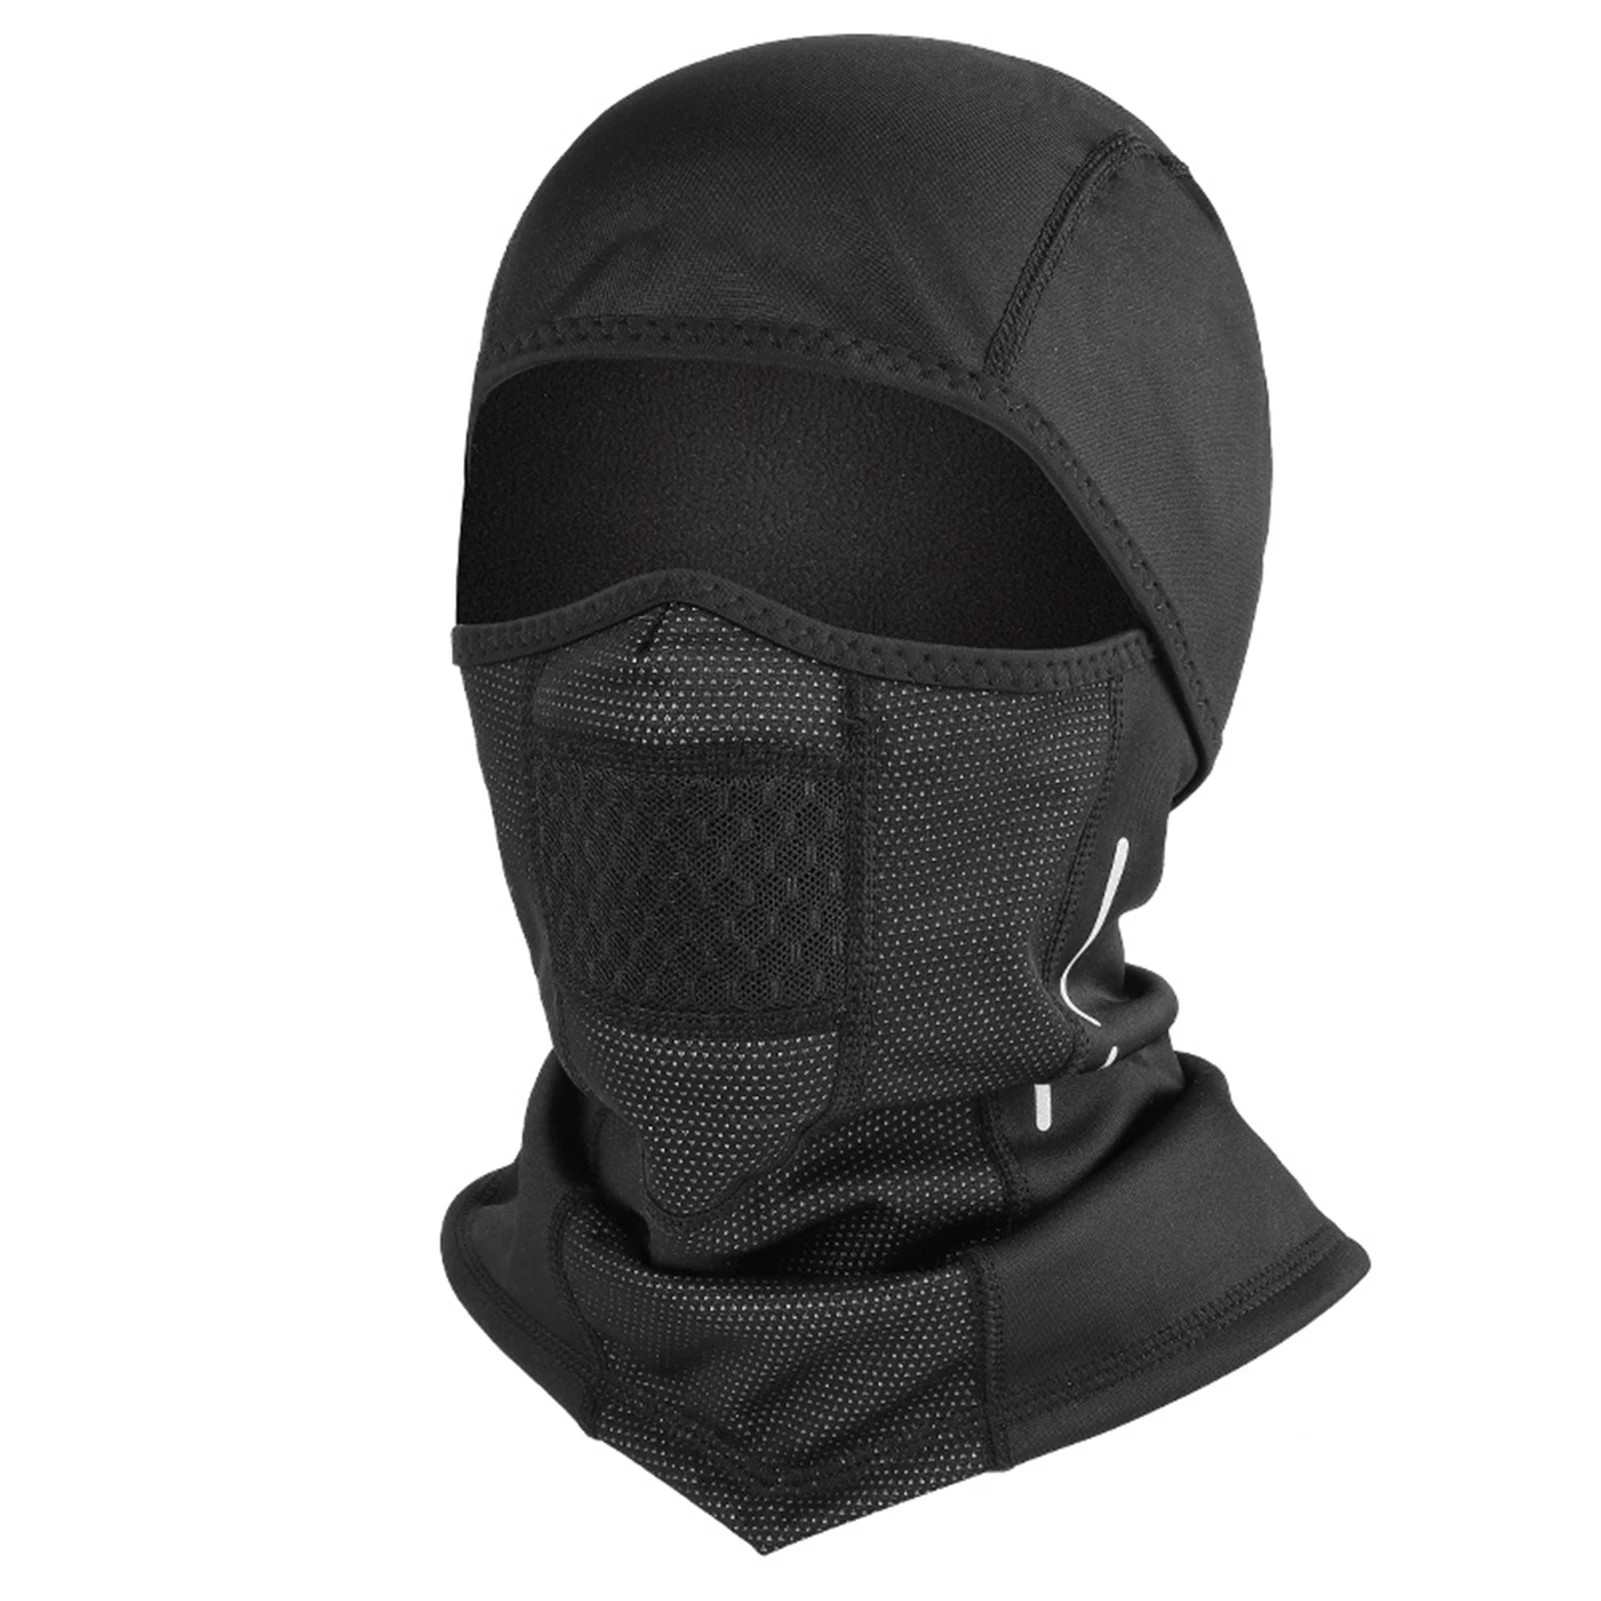 

Balaclava Skiing Cold Weather Ski Face Covering Black Cycling Headgear Windproof Thermal Winter Scarf Neck Warmer Hood Impart